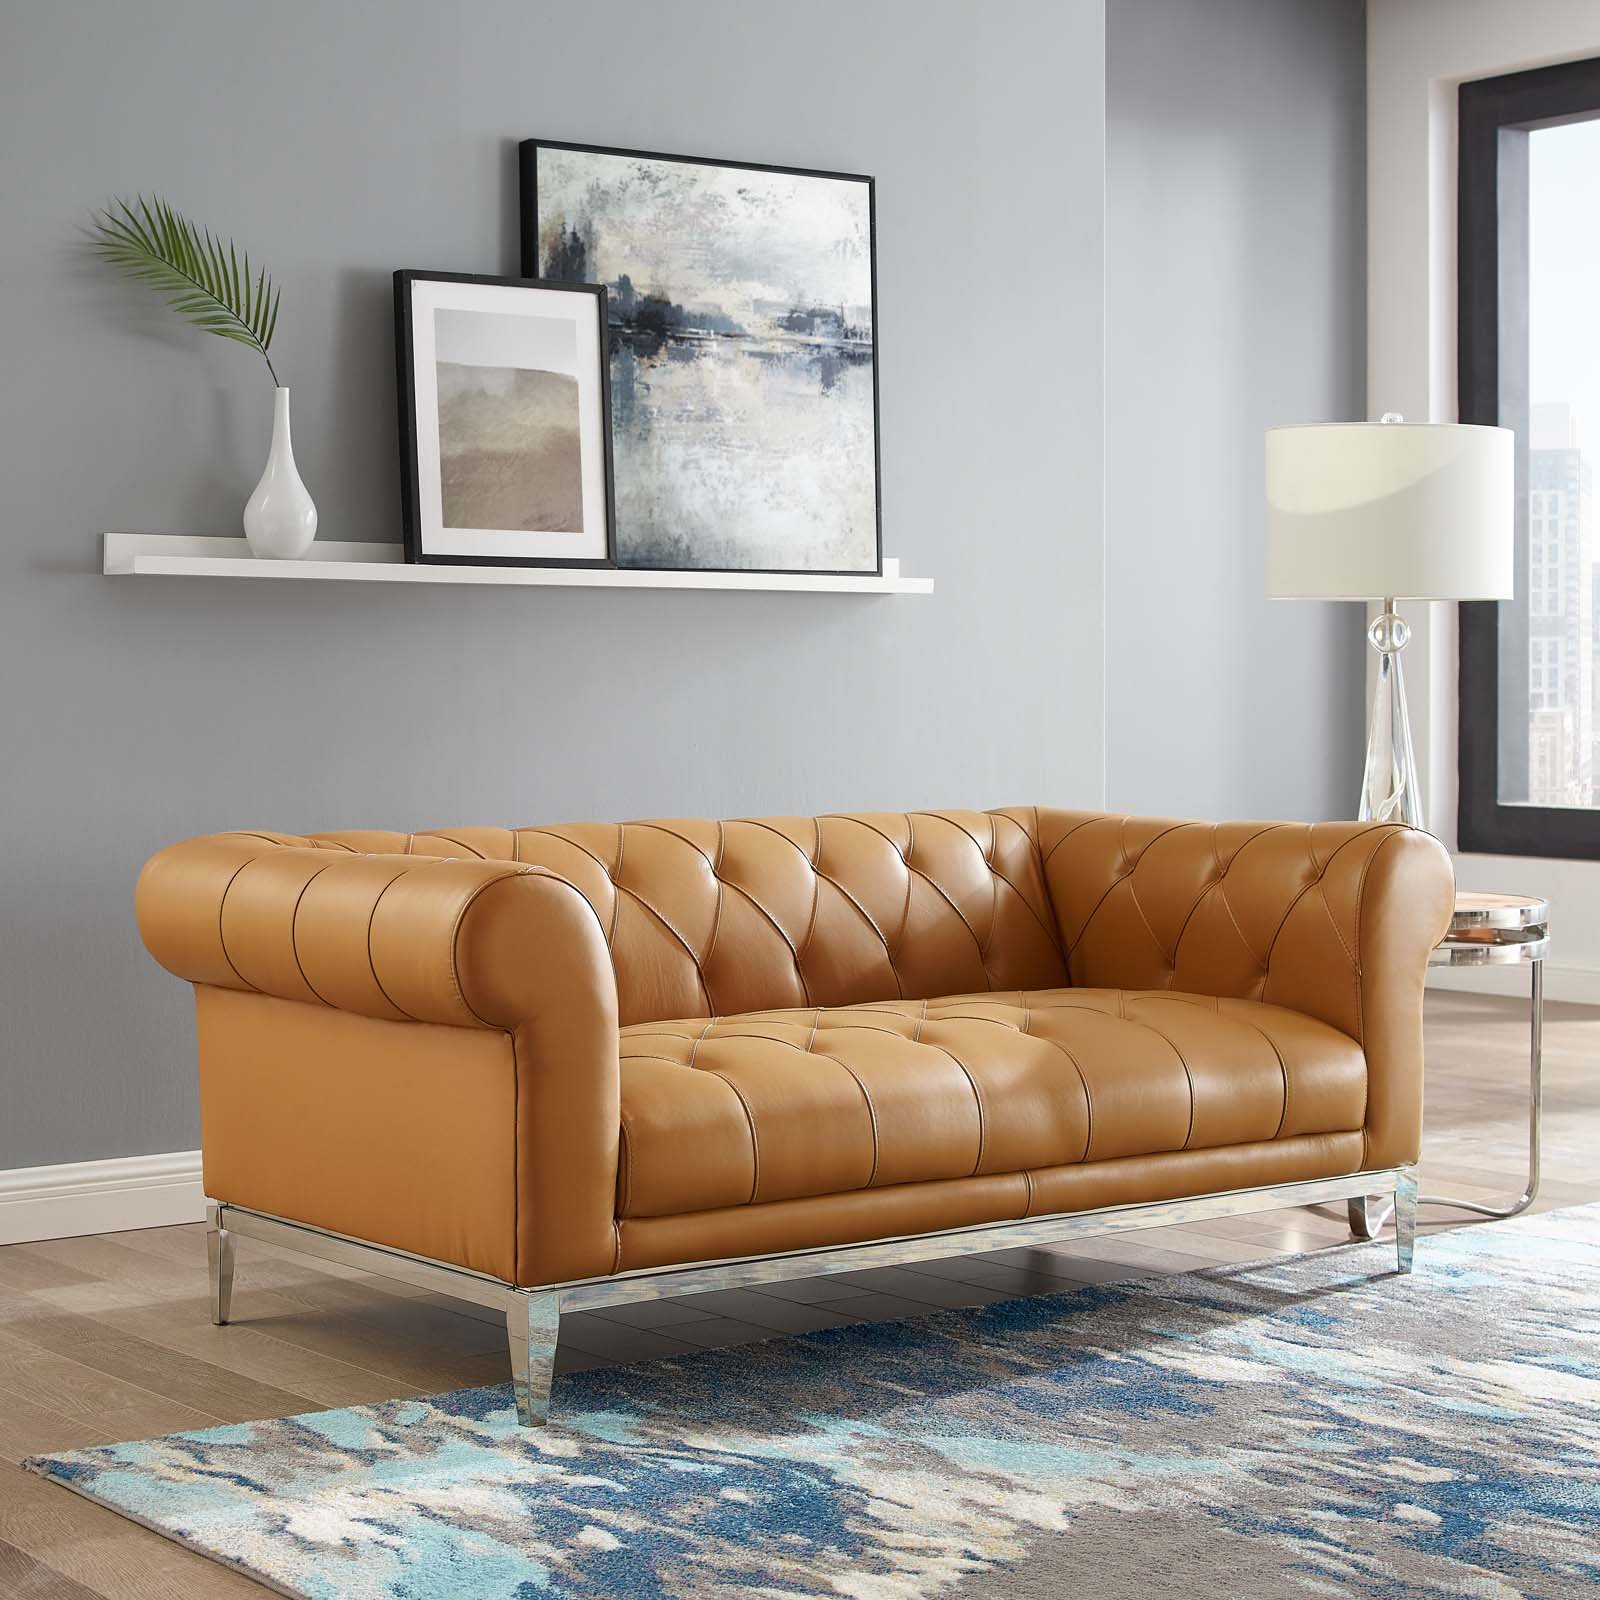 On Tufted Leather Upholstered Tan, Chesterfield Leather Loveseat